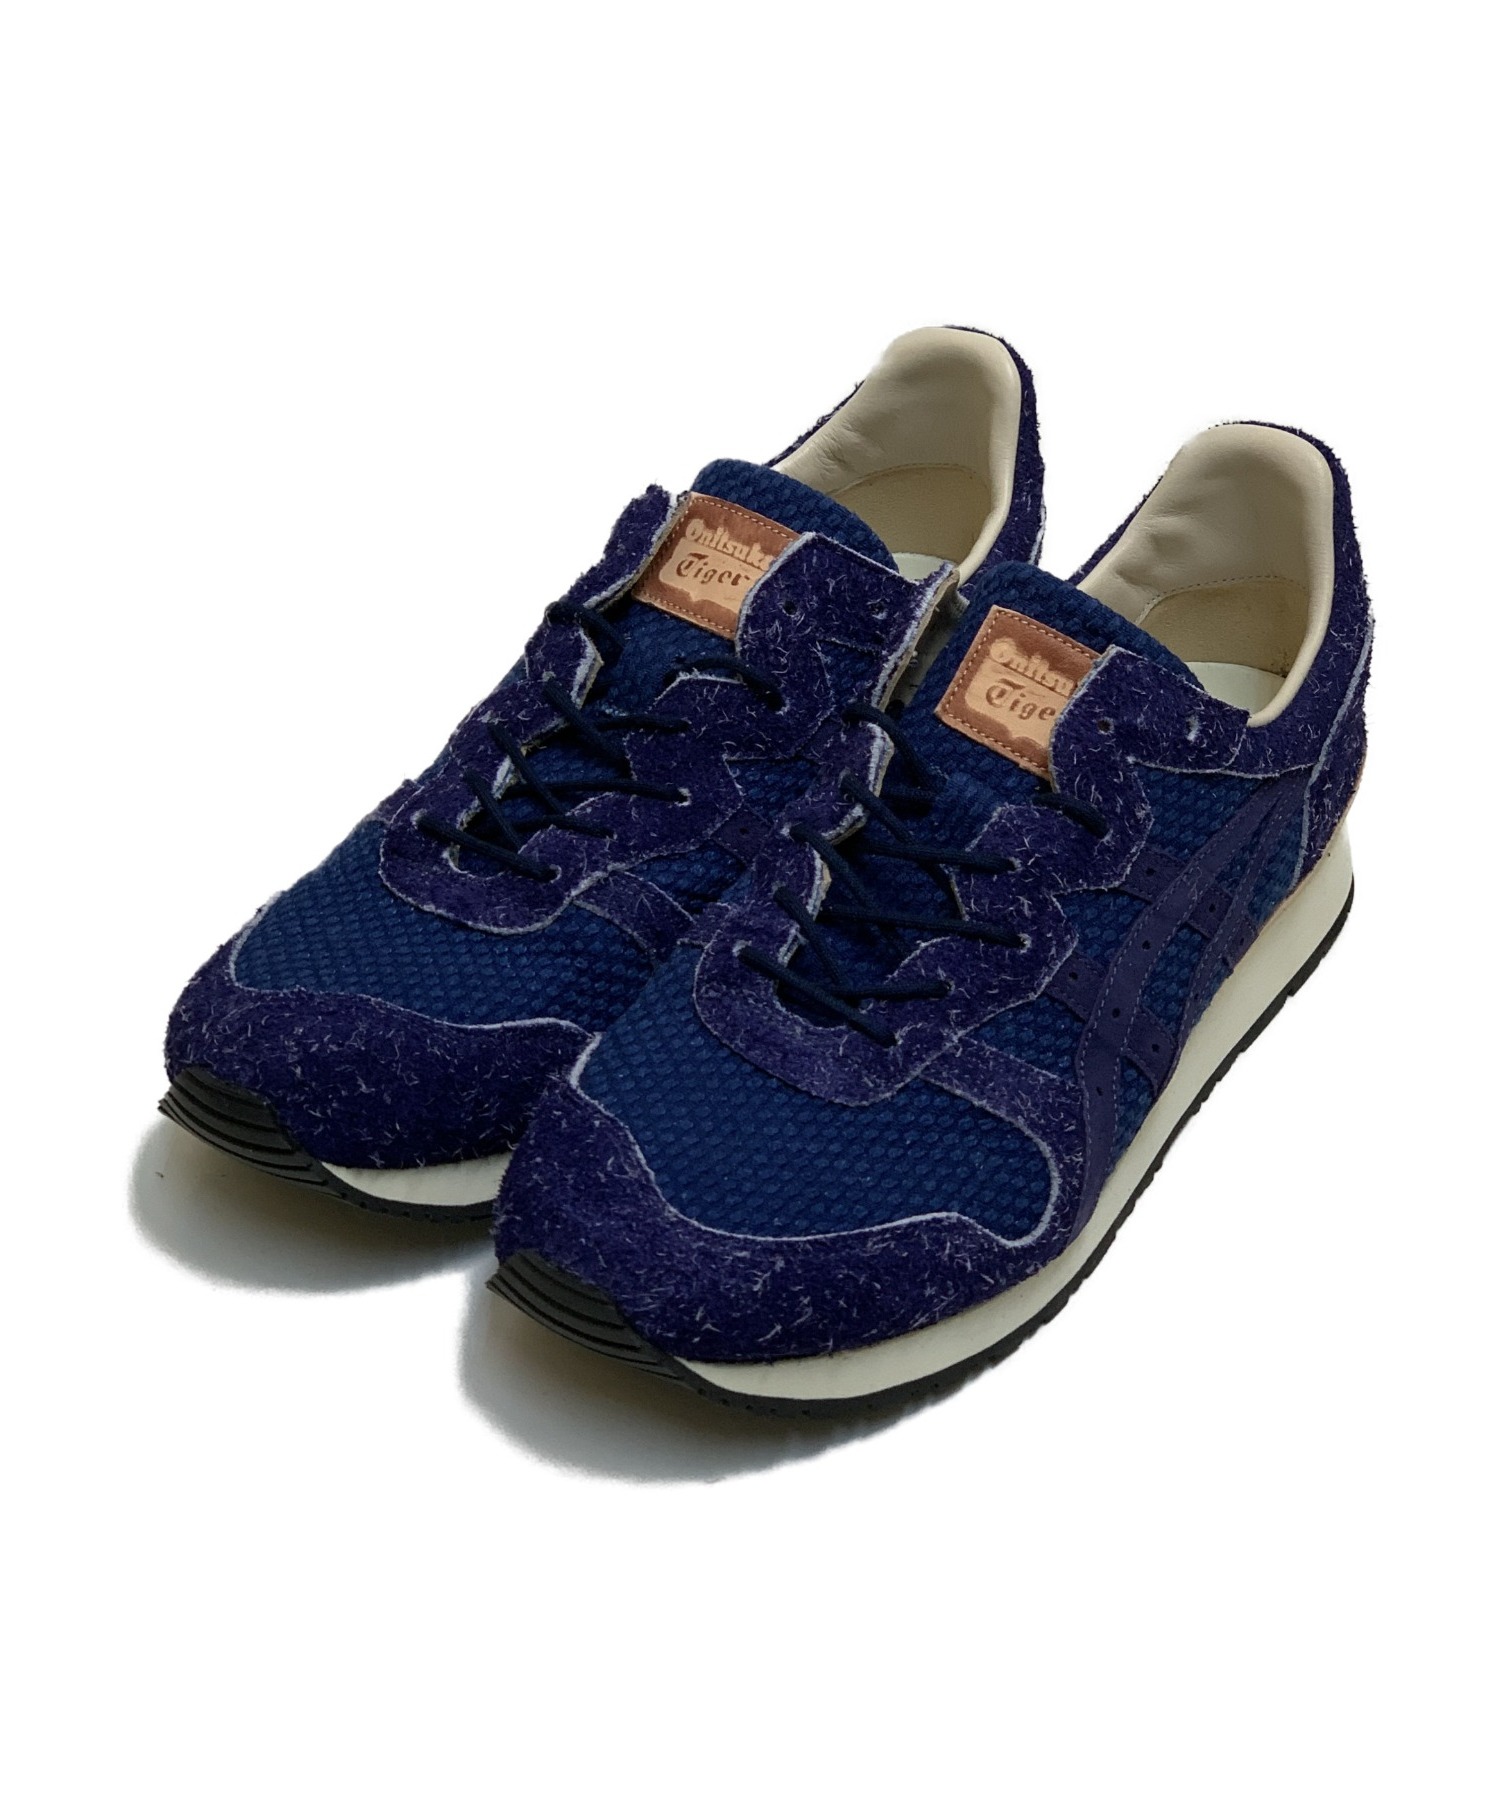 Onitsuka Tiger (オニツカタイガー) TIGER ALLY DELUXE ネイビー サイズ:US9 TIGER ALLY DELUXE  1183A327